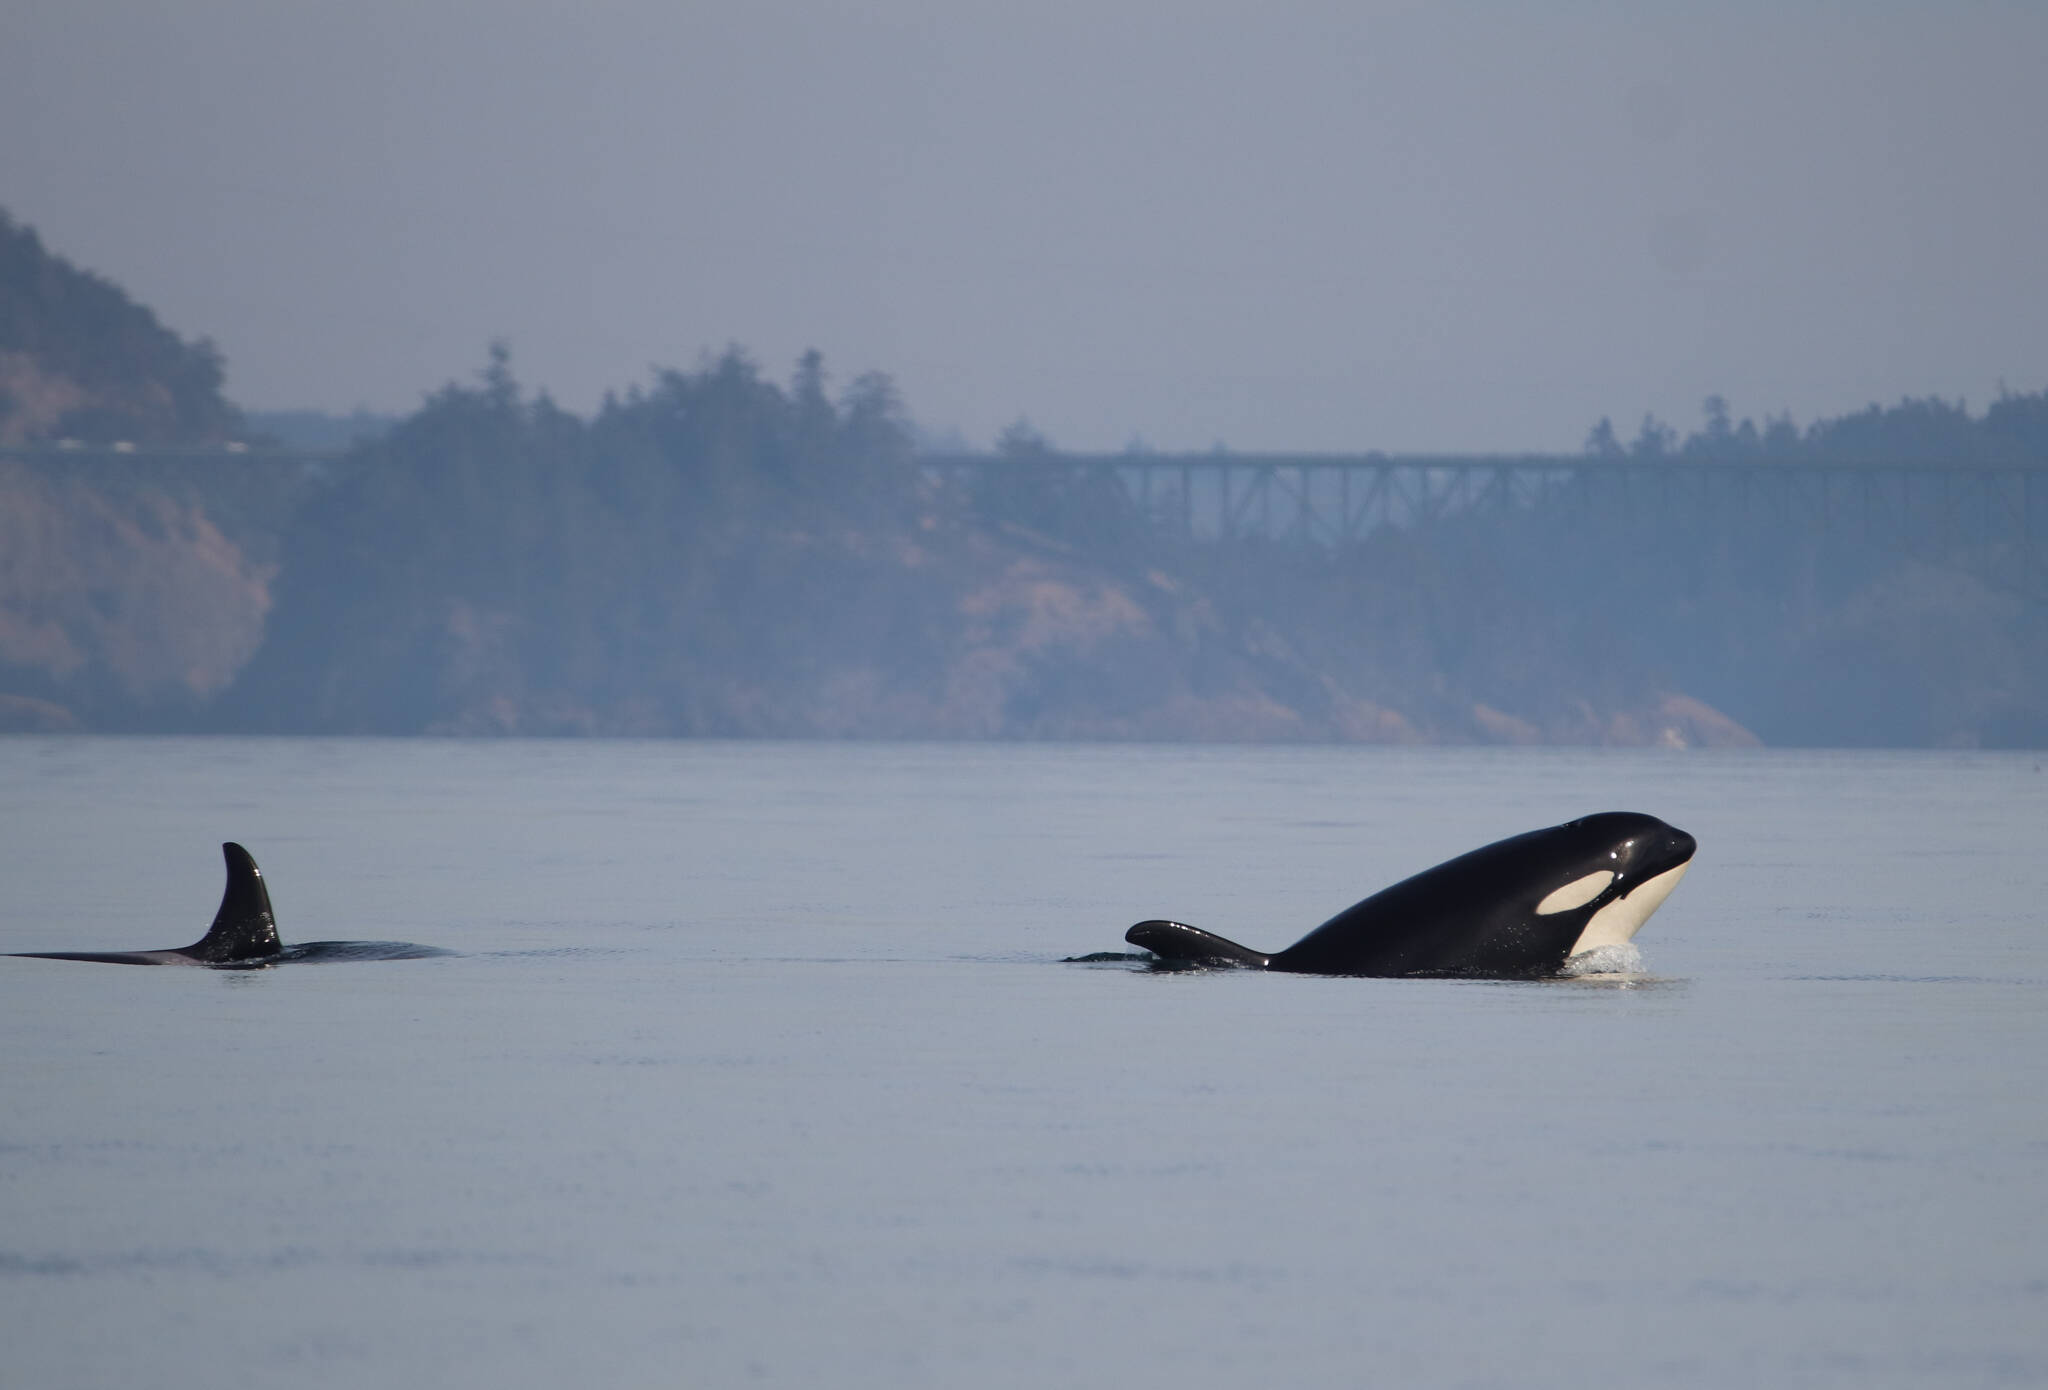 J41 “Eclipse,” right, surfaces near Deception Pass. J22 “Oreo” is behind her. (Photo by Orca Network)